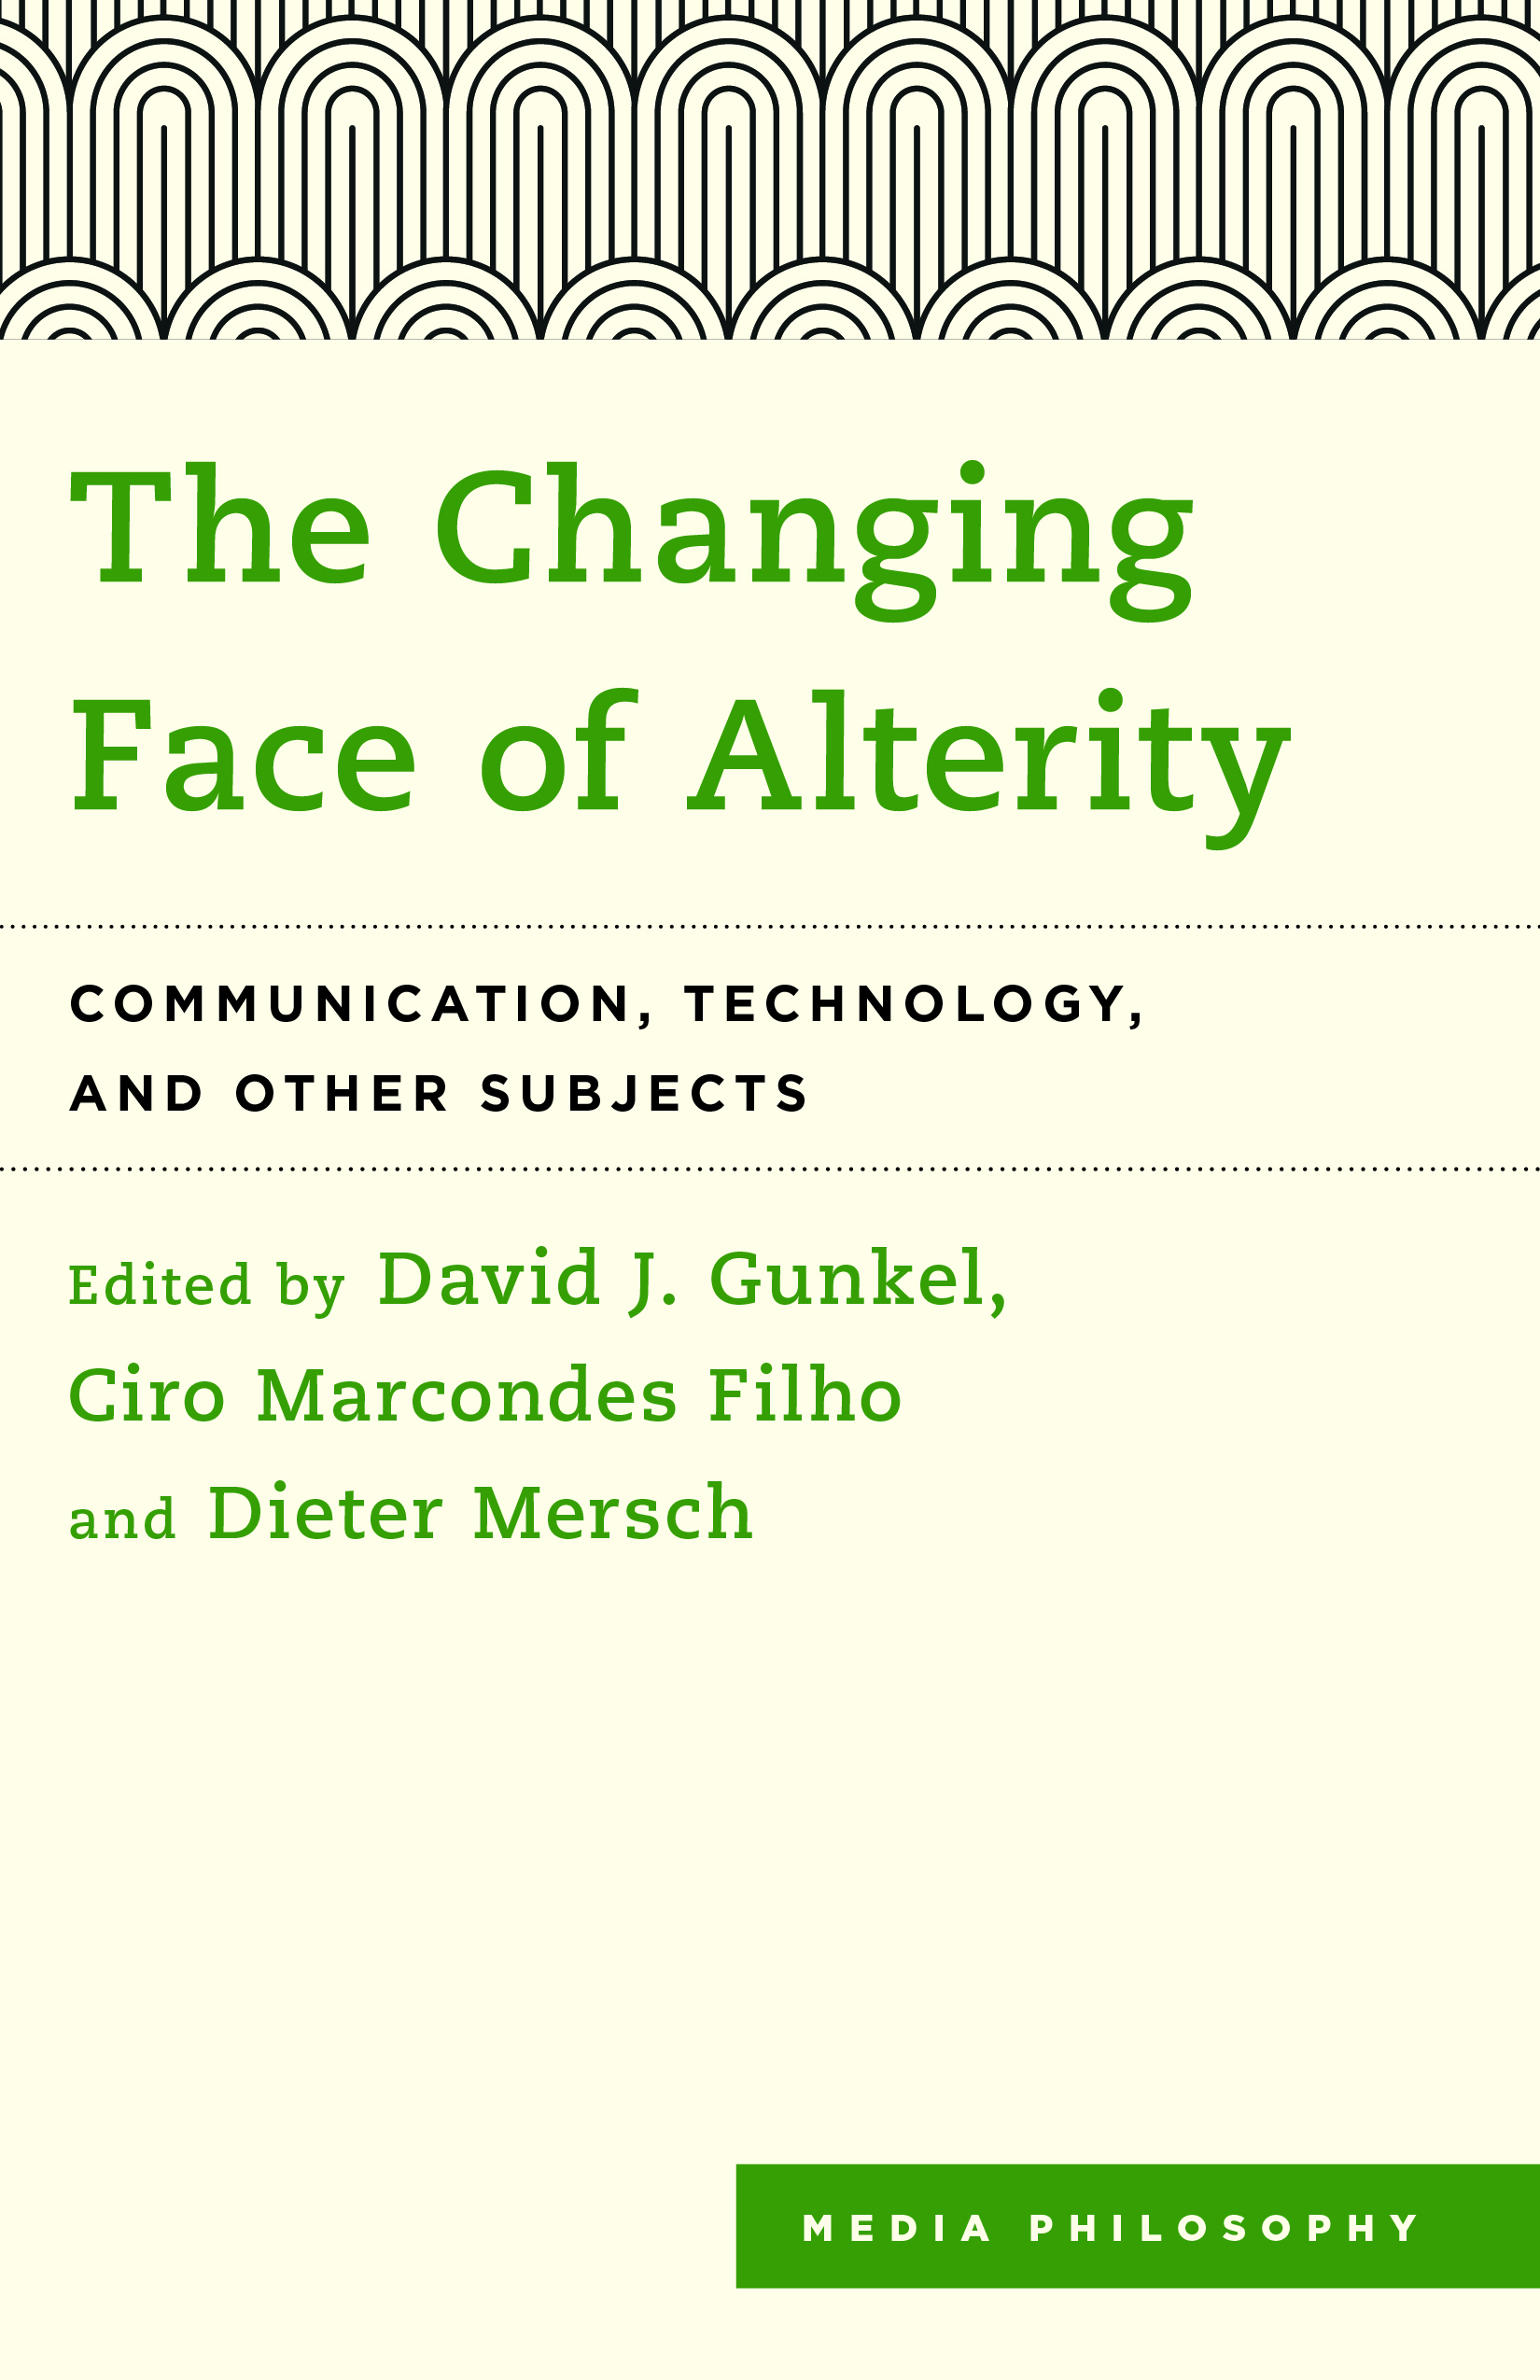 The Changing Face of Alterity: Communication, Technology, and Other Subjects